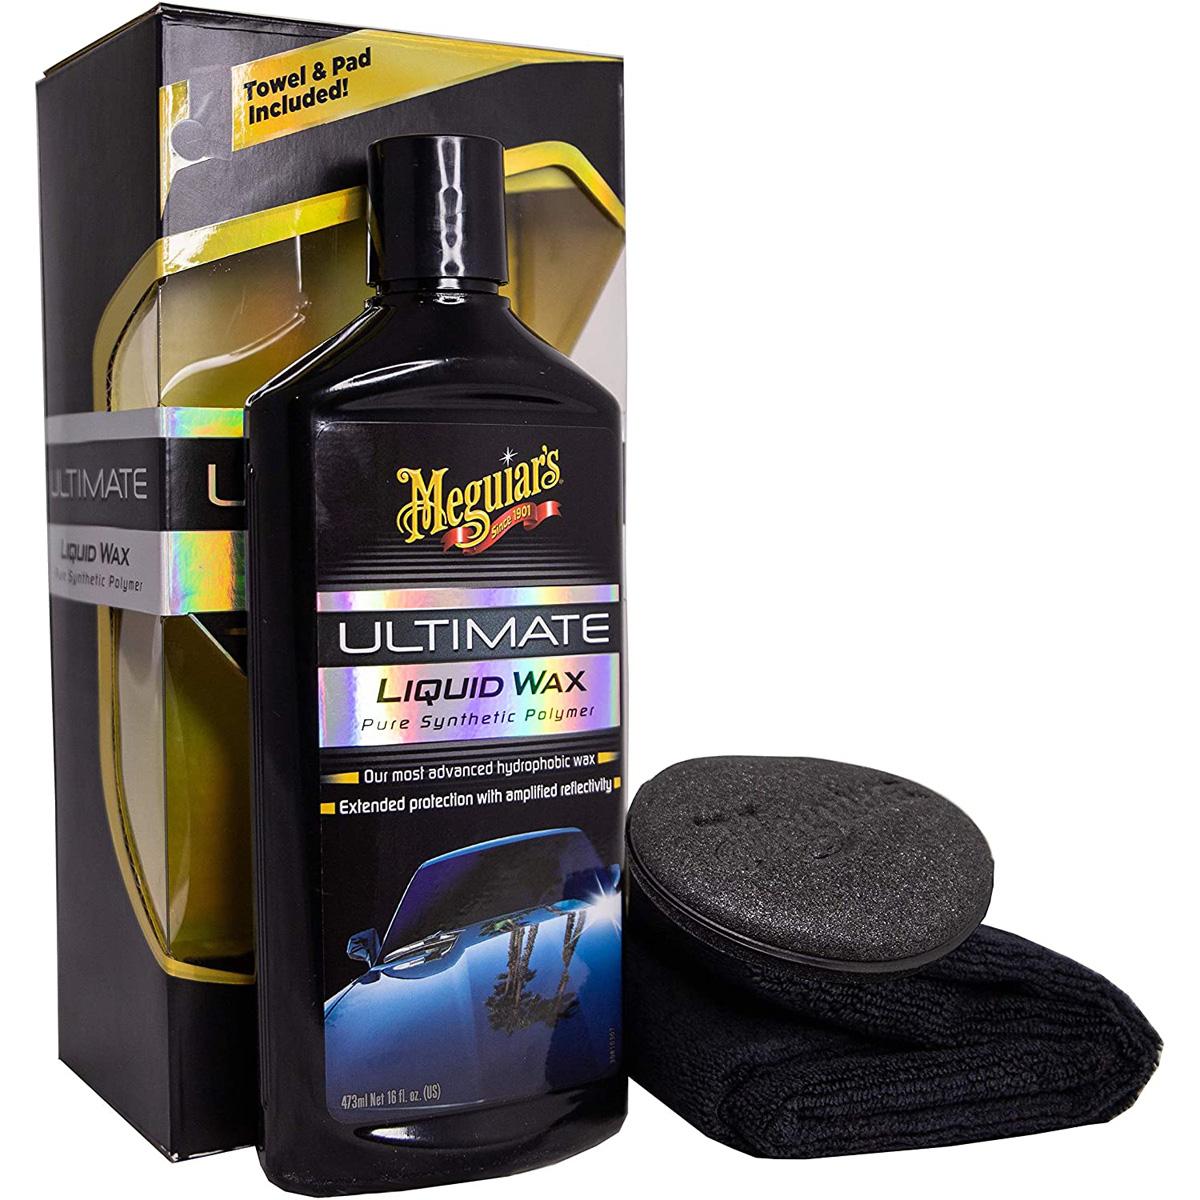 Meguiars Ultimate Liquid Wax for Automobile for $8.65